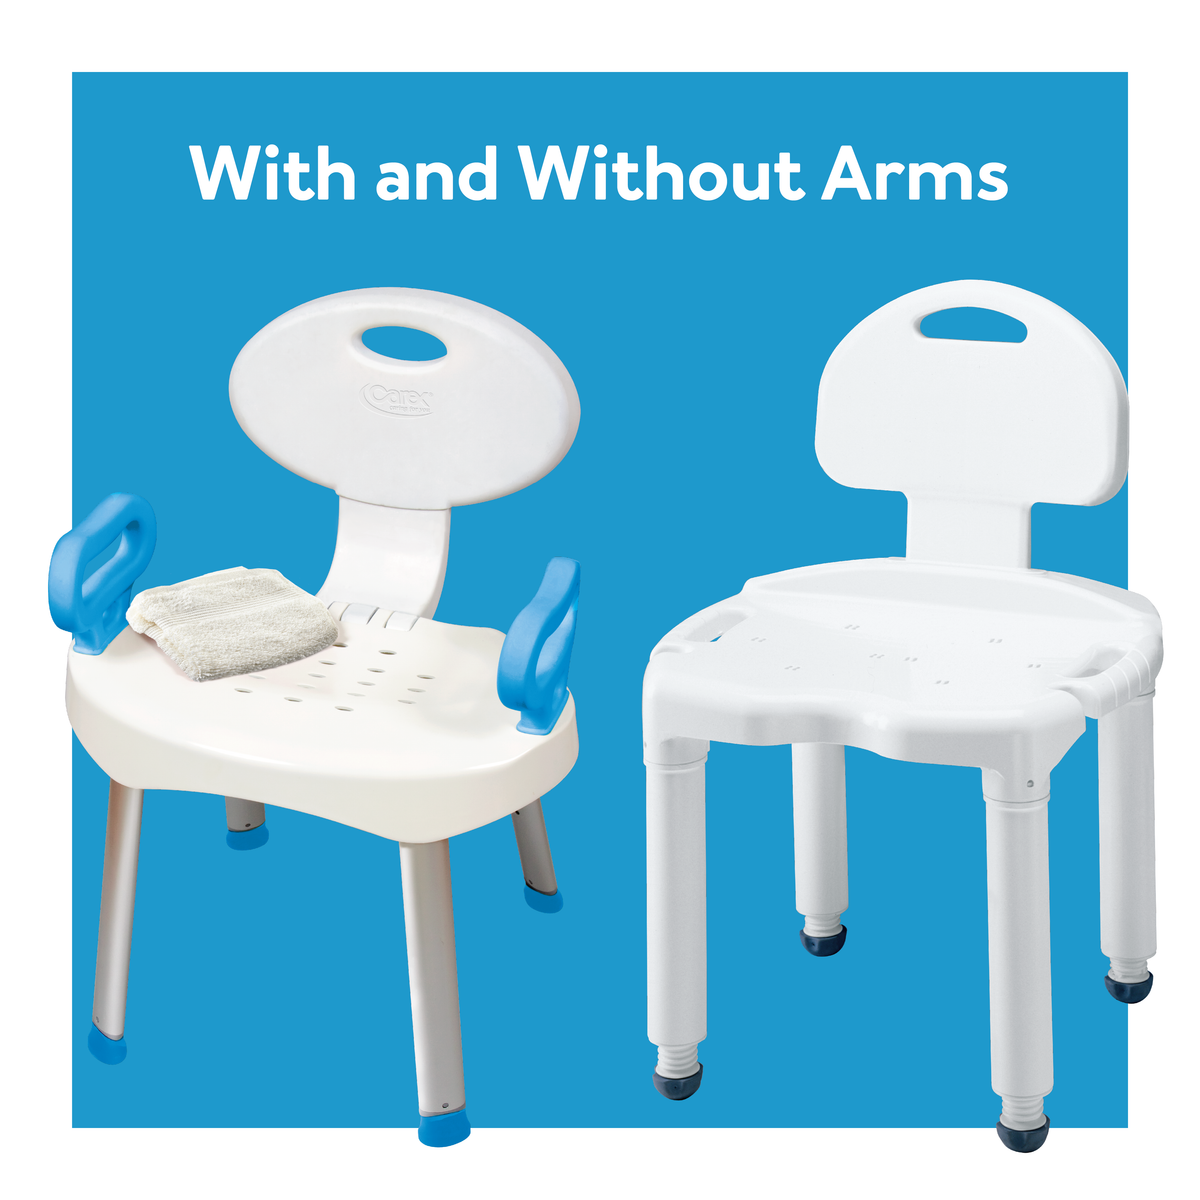 A shower seat with arms next to one without. Text, “with and without arms”